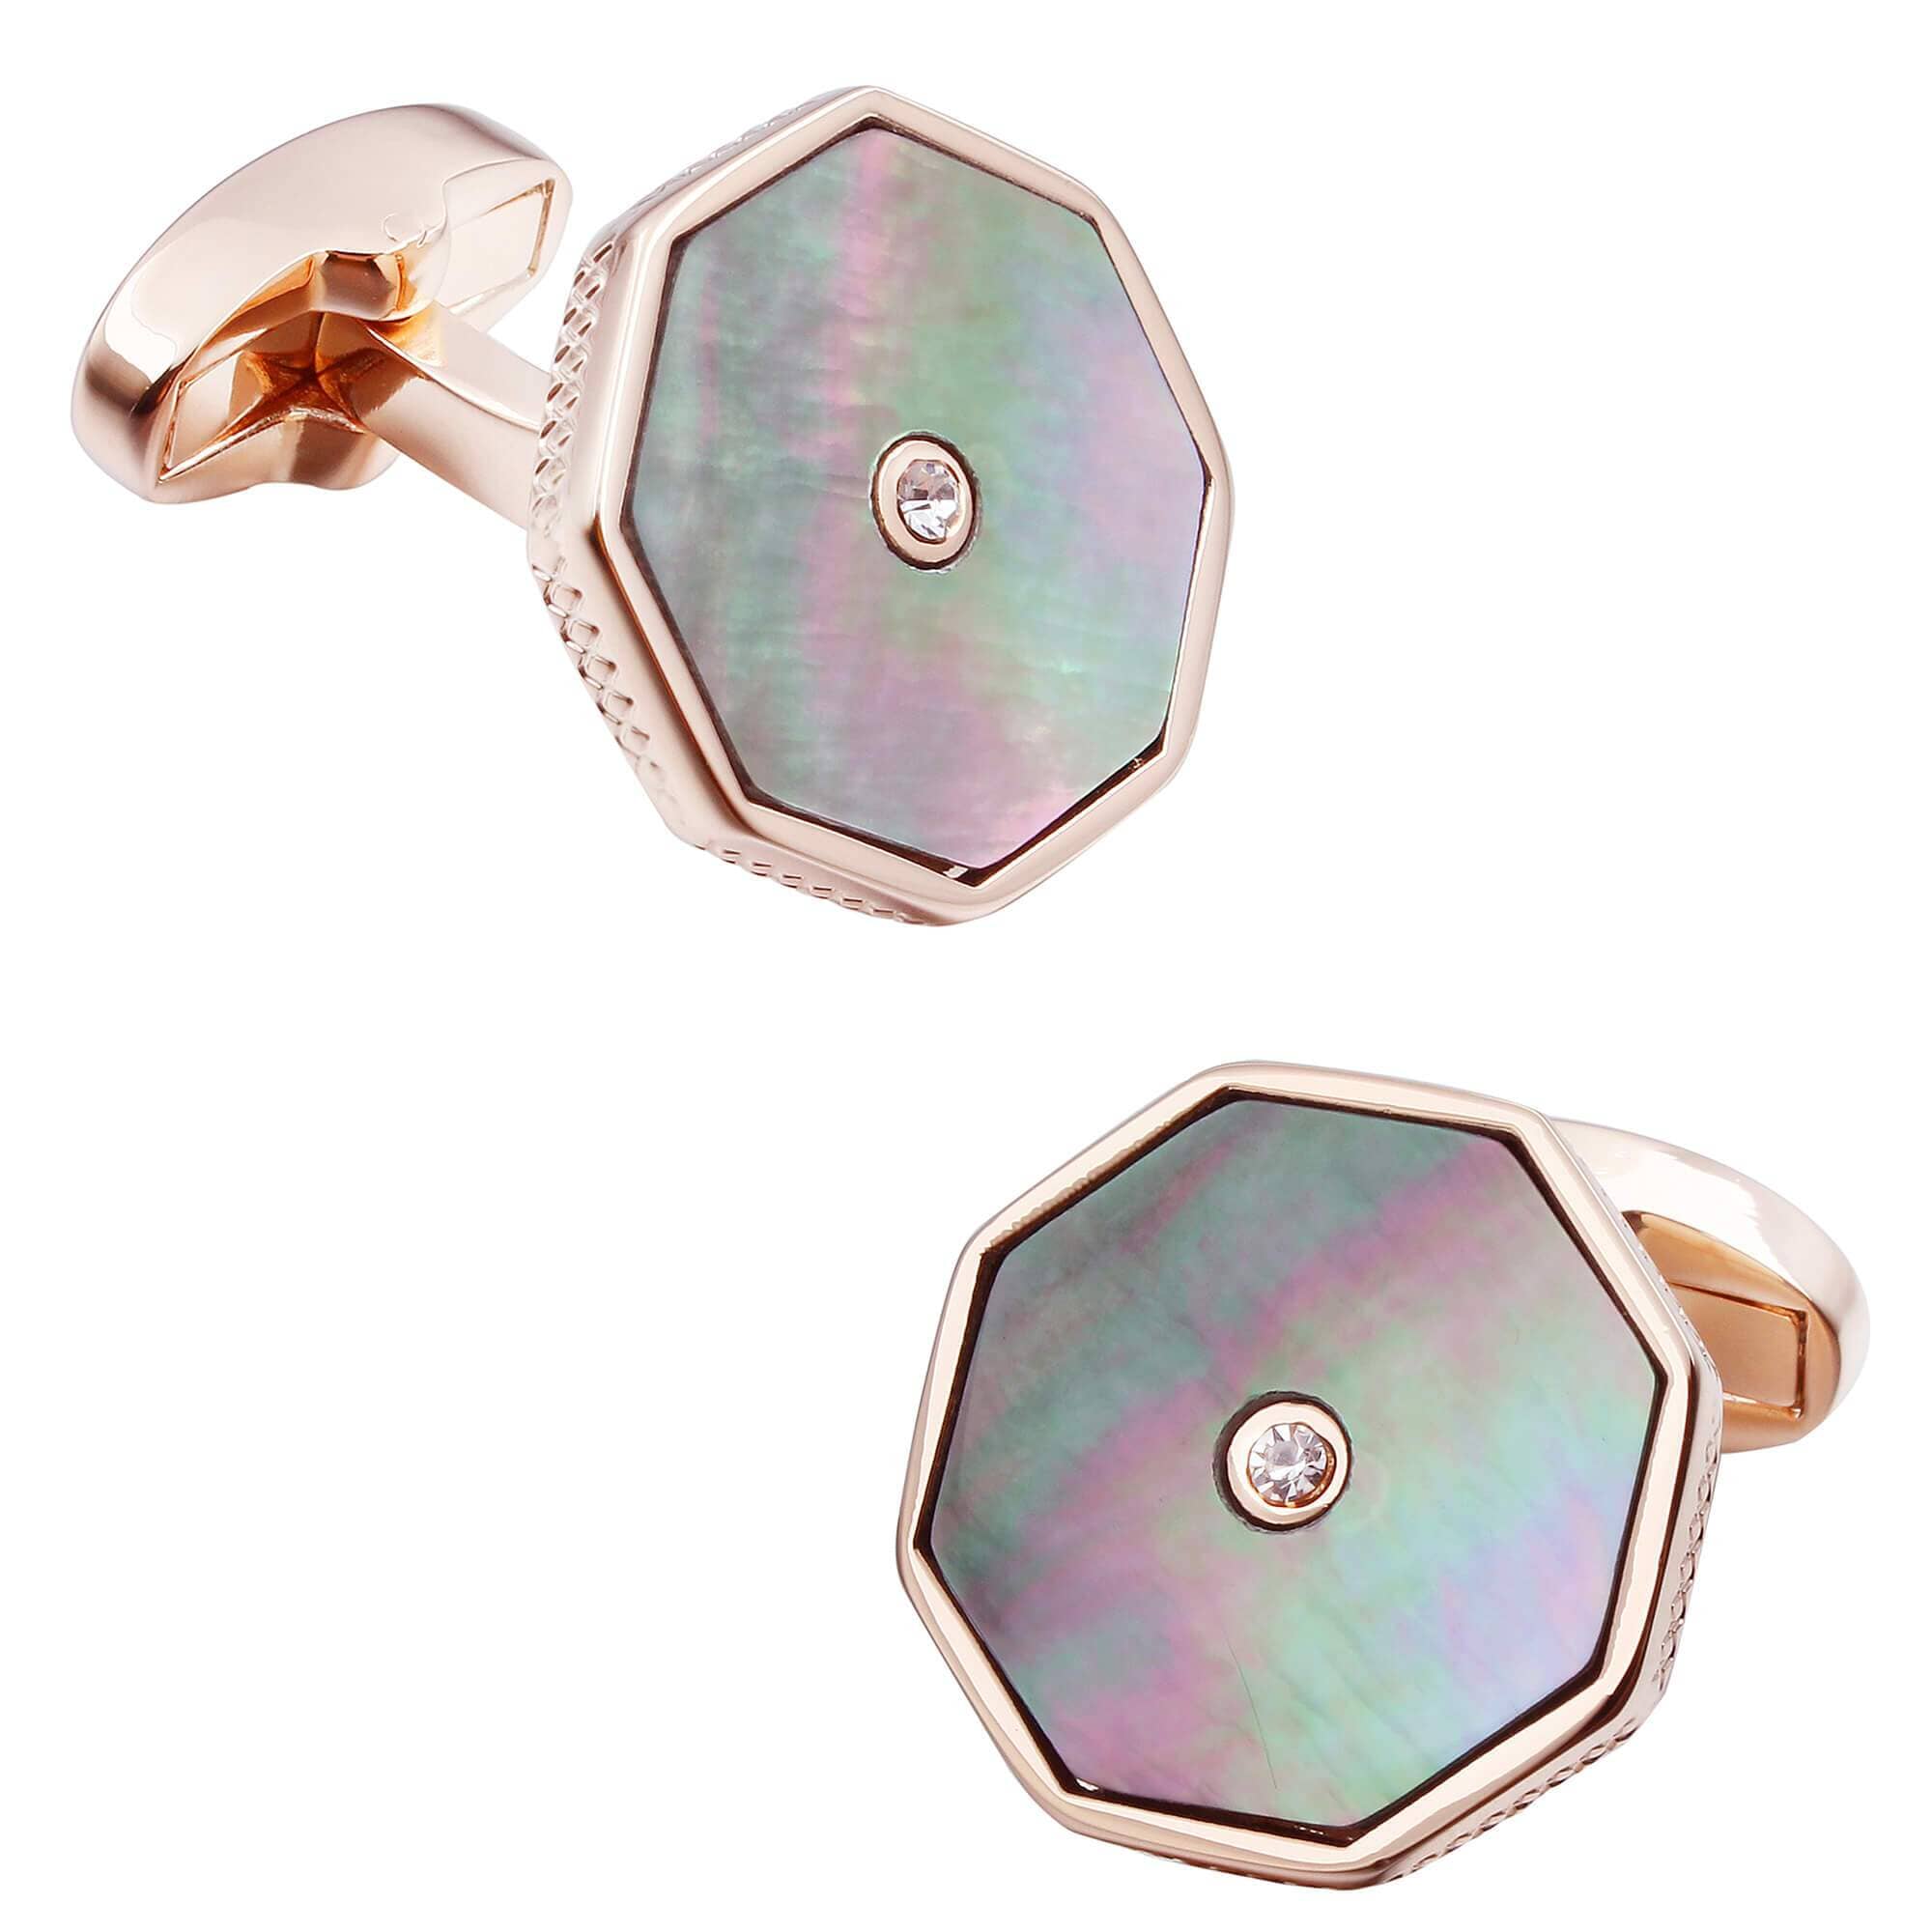 Black Mother of Pearl with Crystal in Rose Gold Cufflinks Classic & Modern Cufflinks Clinks Australia 